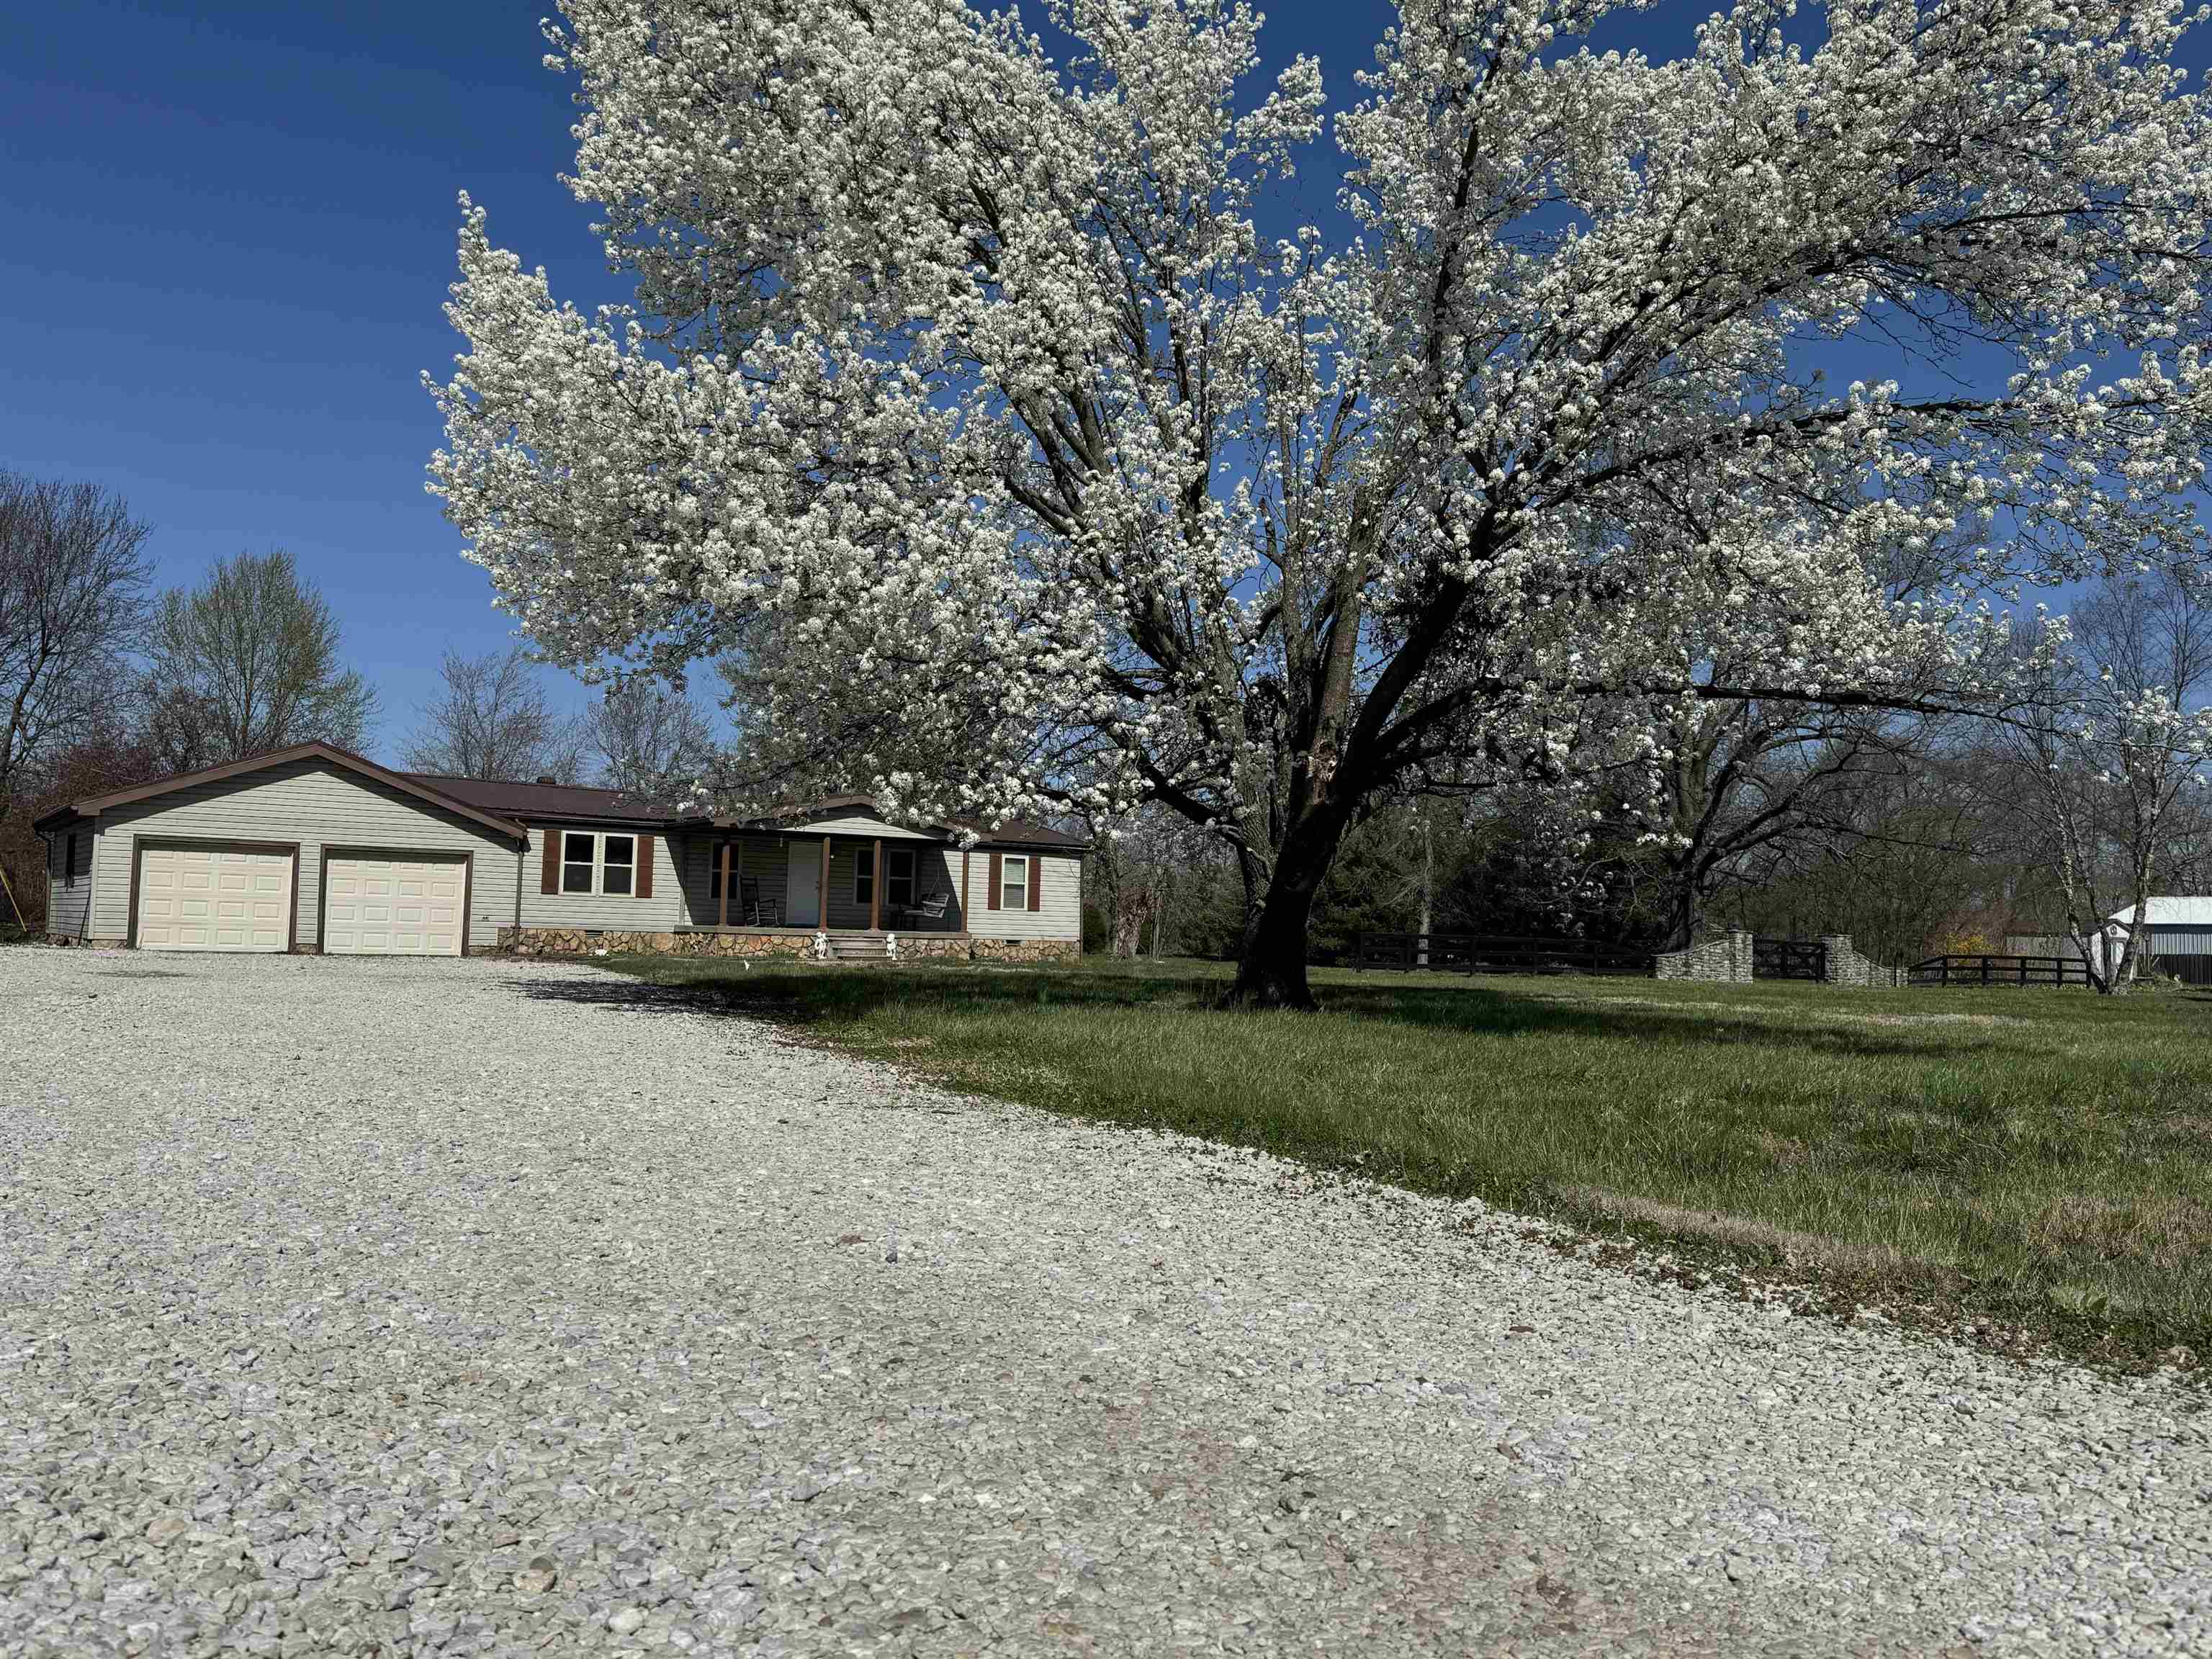 7384 Old Hwy 81, Owensboro, Kentucky 42301-0000, 3 Bedrooms Bedrooms, ,2 BathroomsBathrooms,Manufactured Home,For Sale,Old Hwy 81,89214